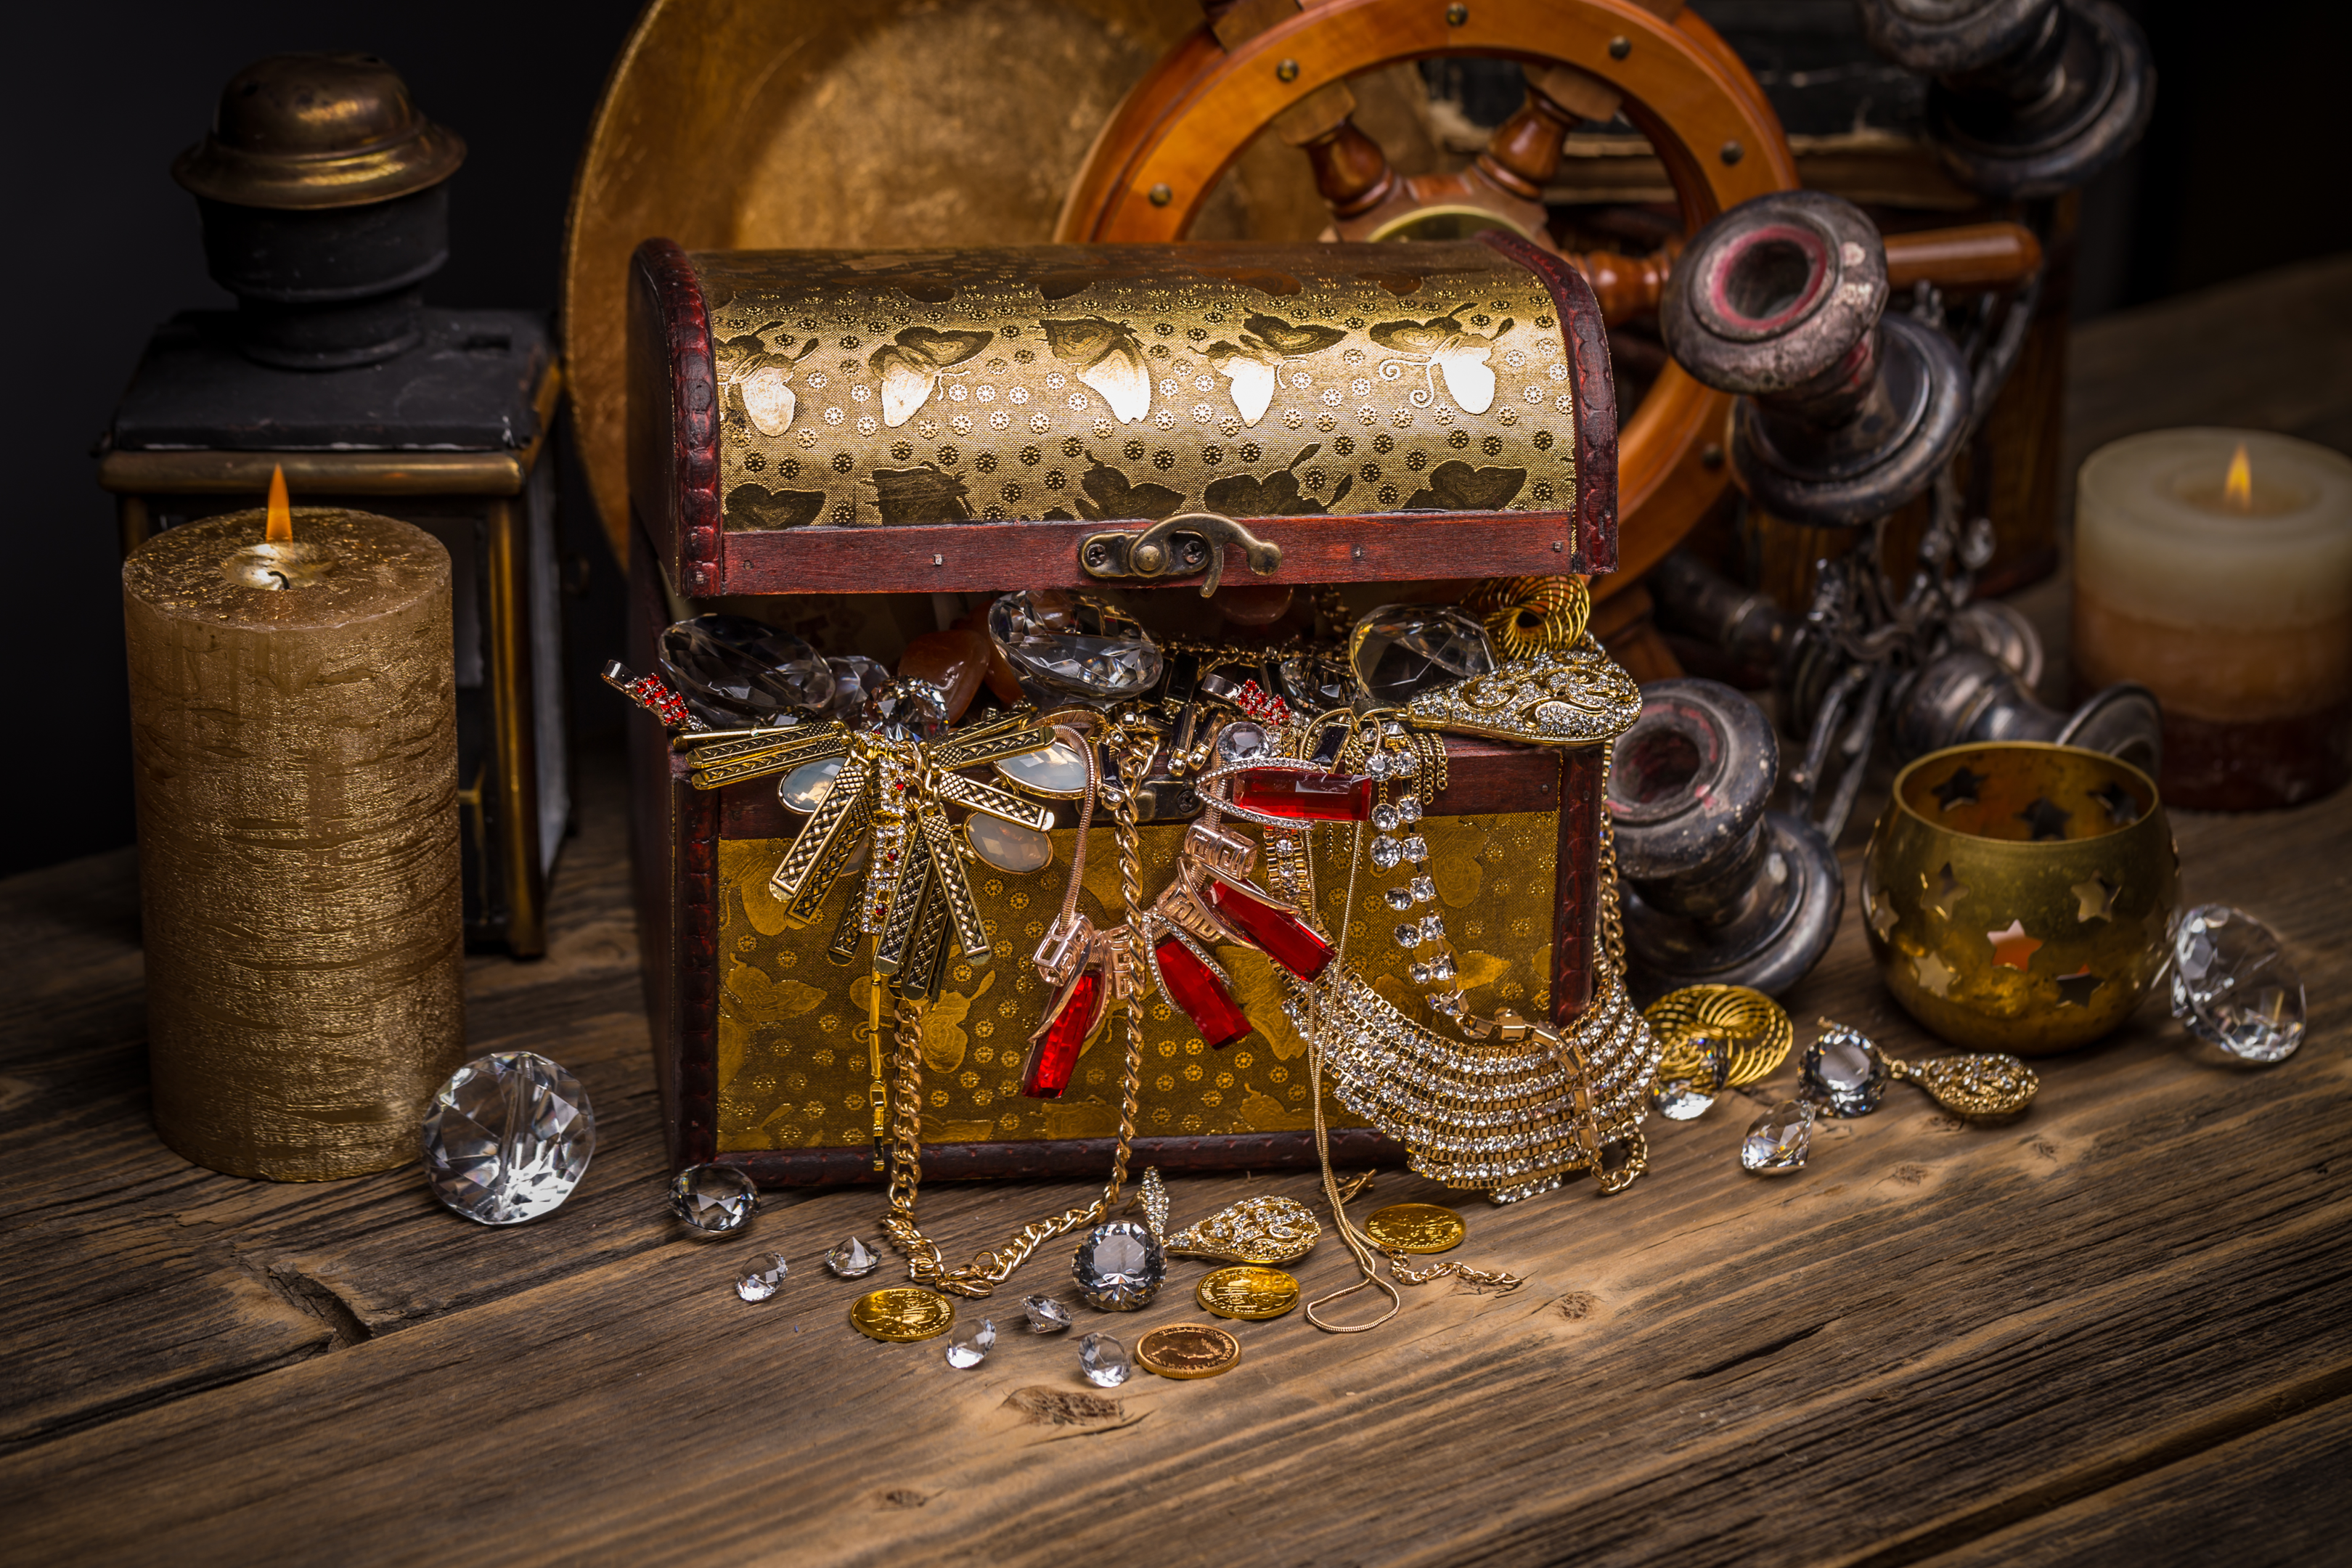 Treasure chest resembling Pandora's Box symbolizing the complexities and consequences of crossing boundaries in marriages and love relationships in New York City, leading to infidelity, adultery, and cheating.